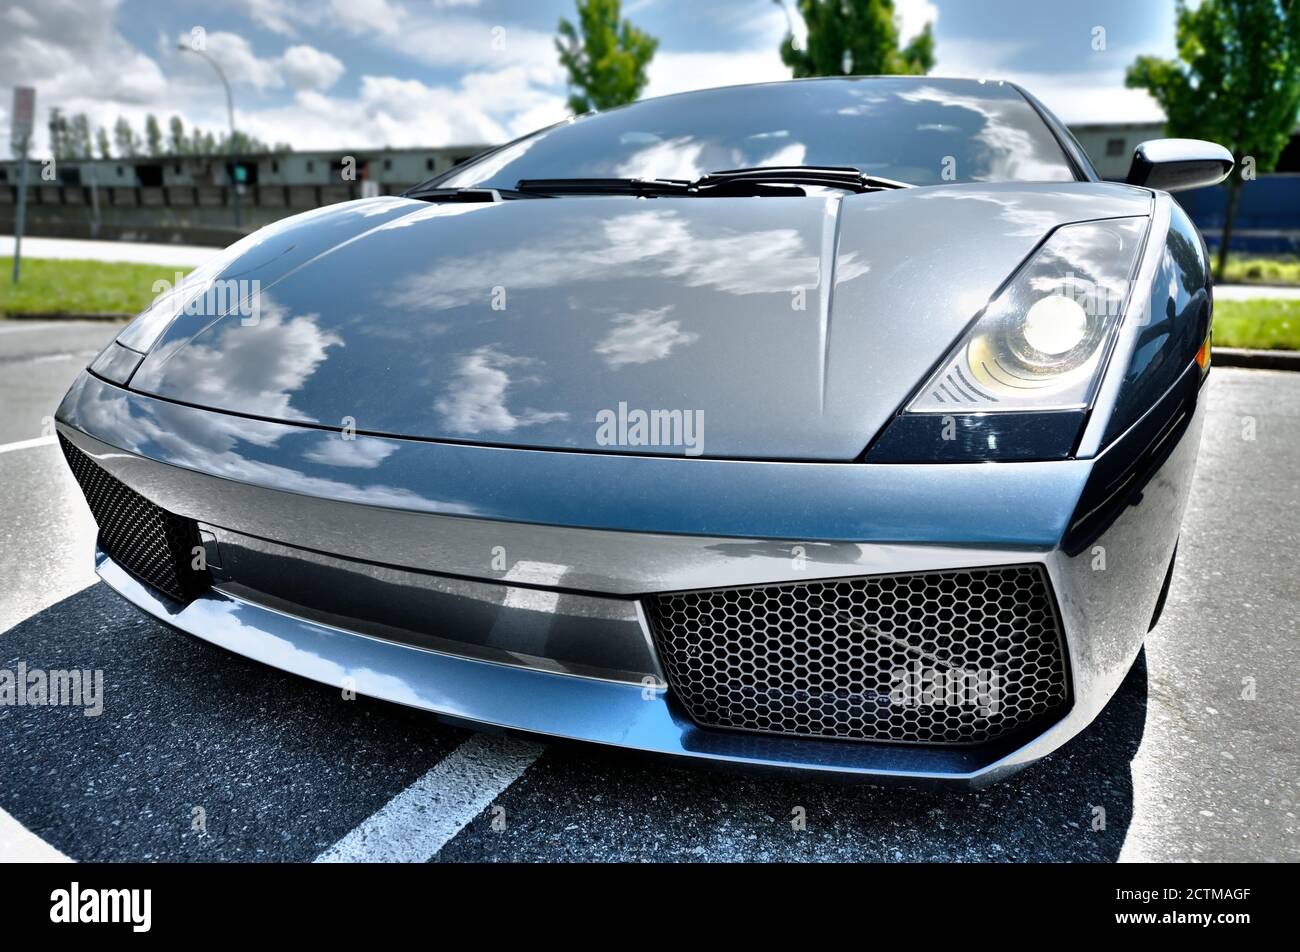 Isolated front wide angle view of blue metallic colored powerful sports car parked on a public road. Sky and clouds reflections on the shiny metal Stock Photo